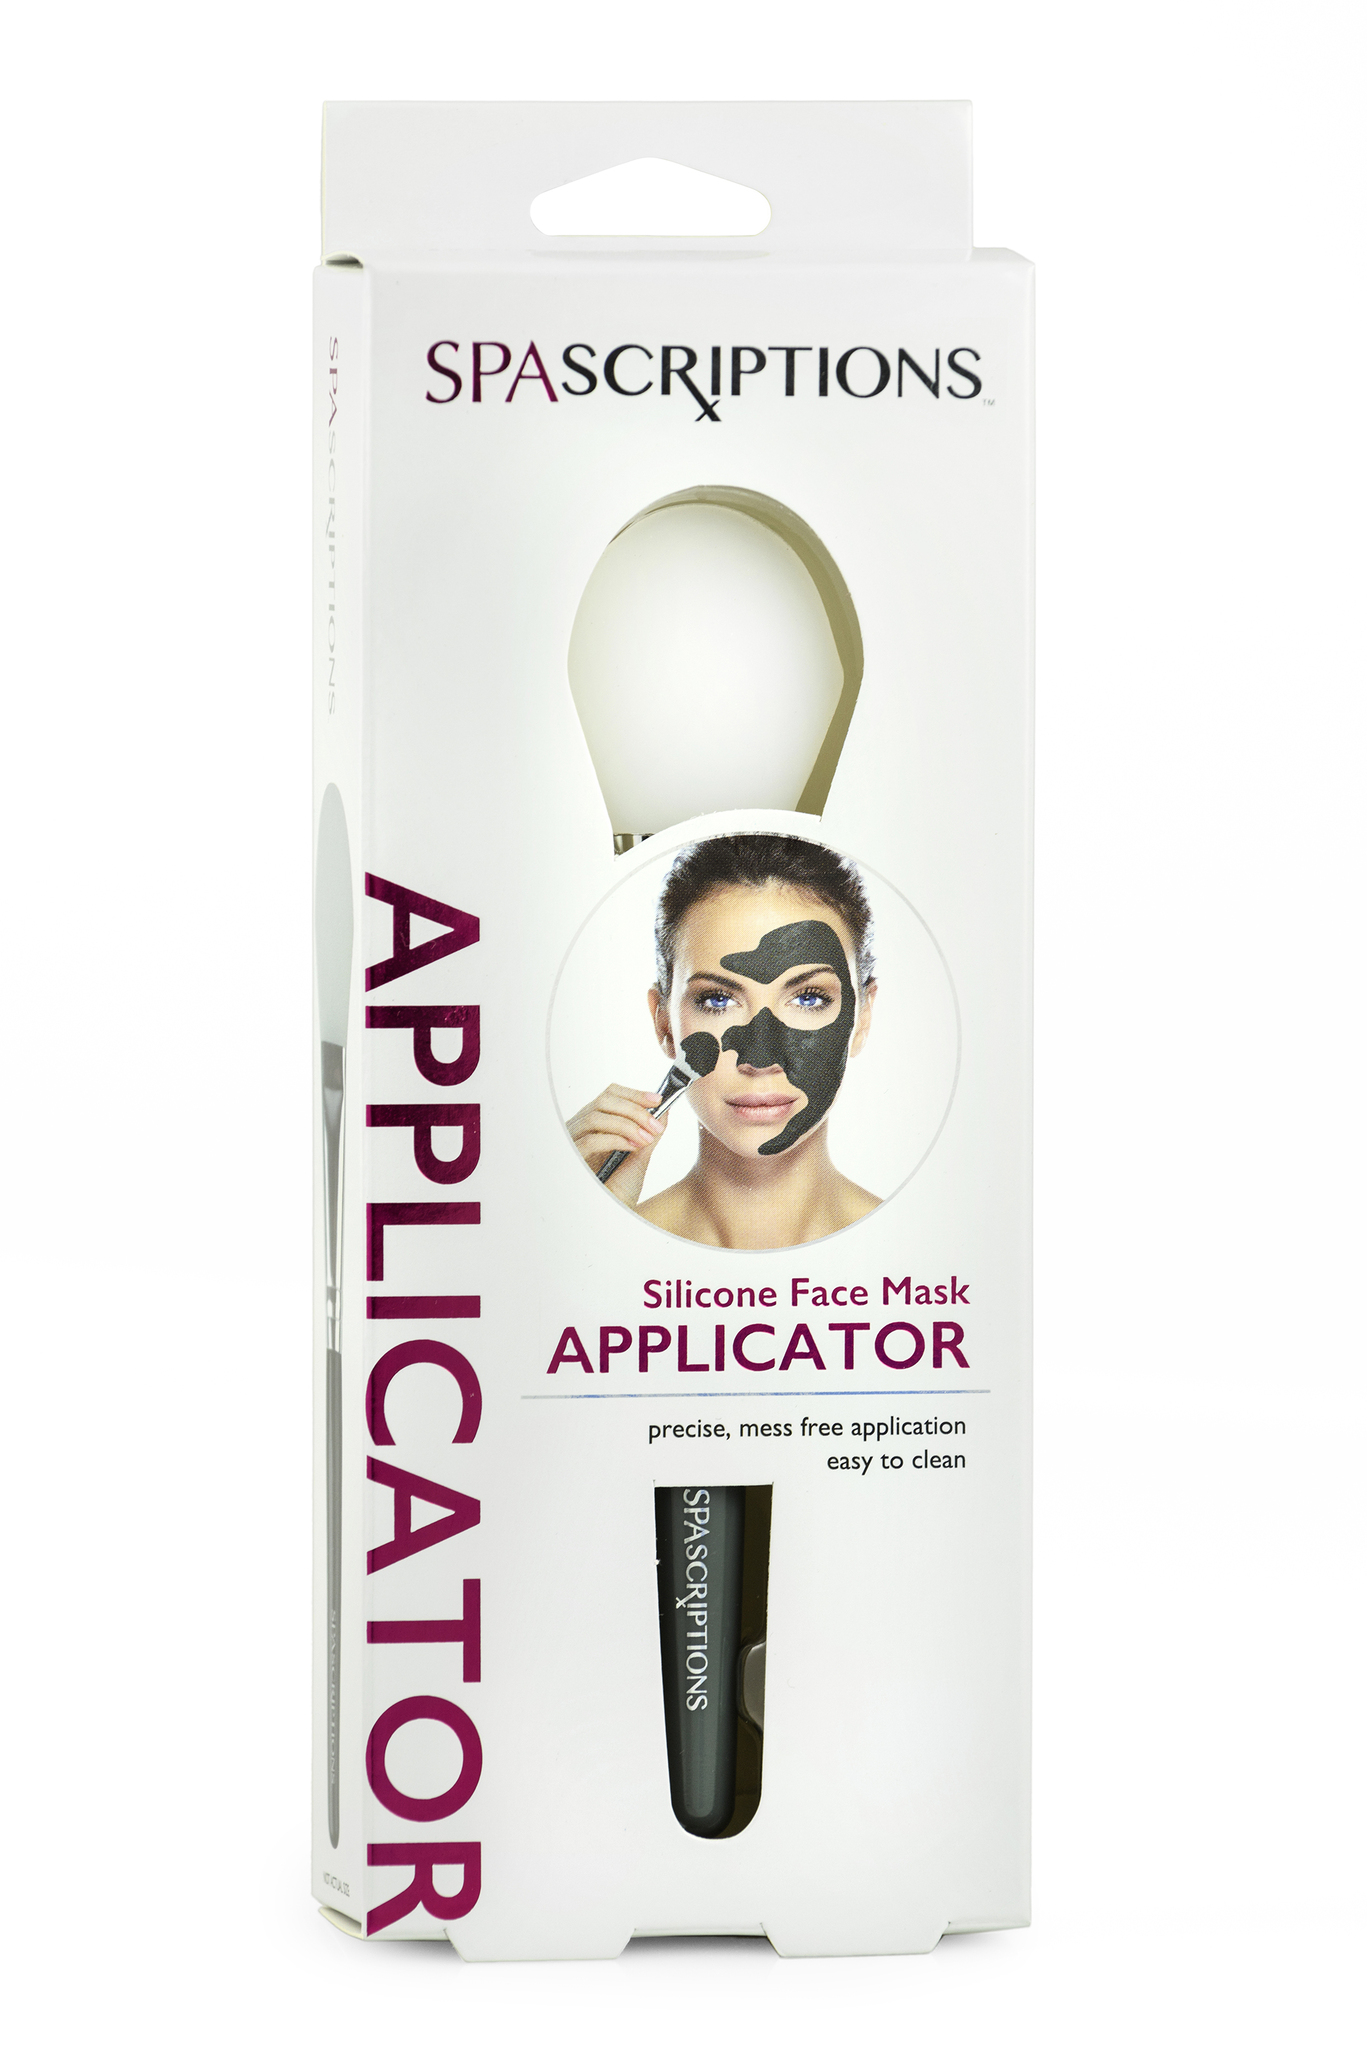 SPASCRIPTIONS - Silicone Mask Applicator